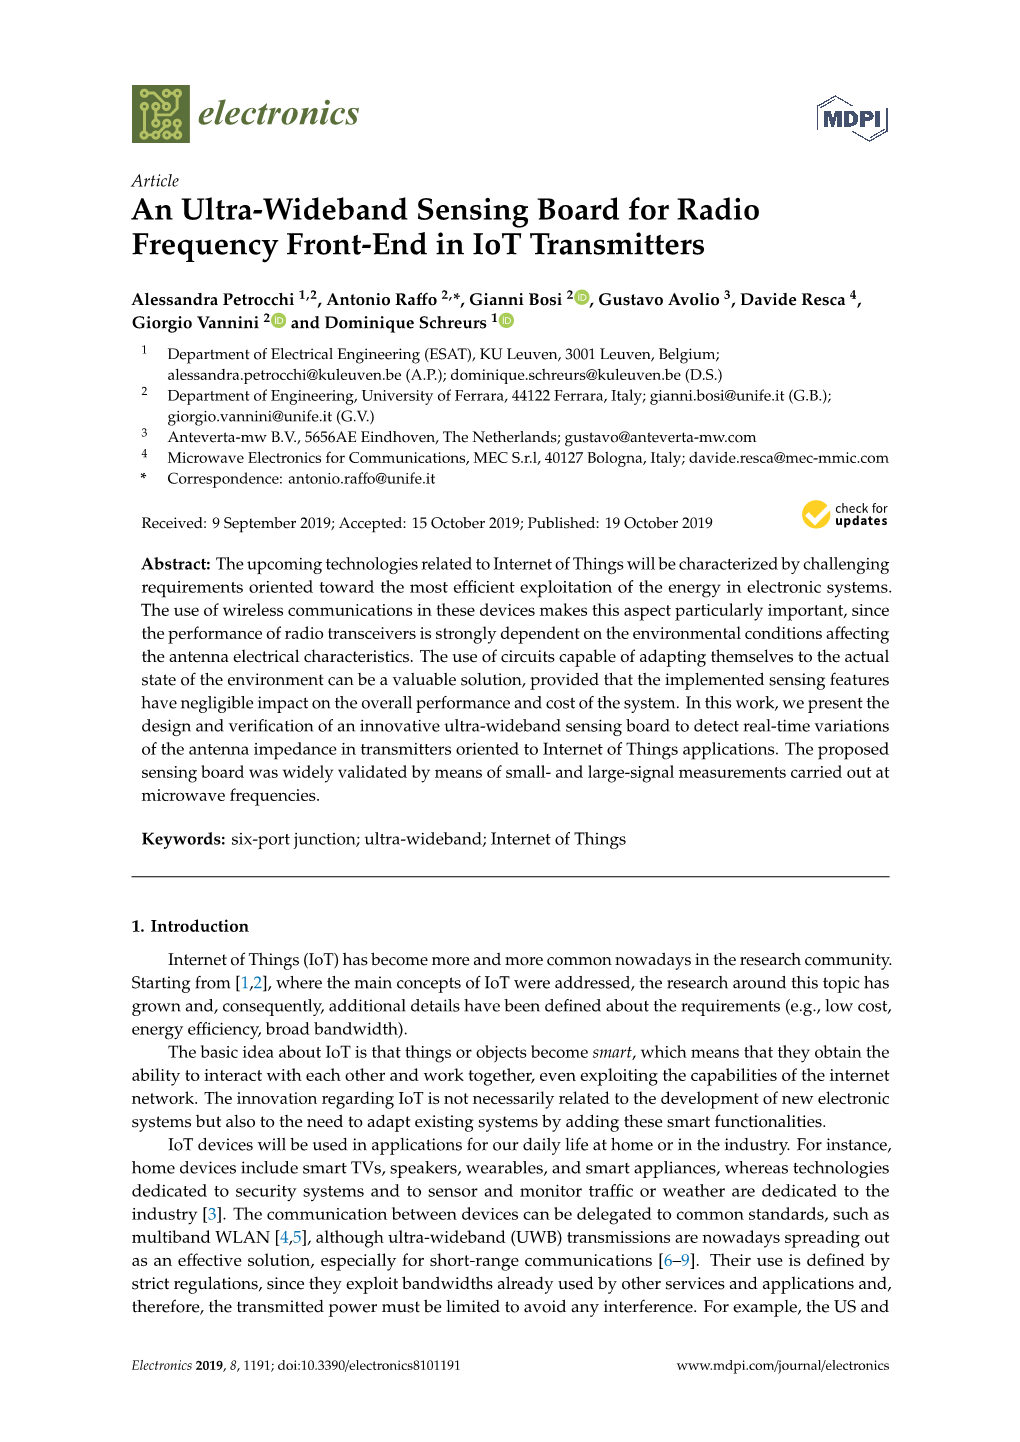 An Ultra-Wideband Sensing Board for Radio Frequency Front-End in Iot Transmitters